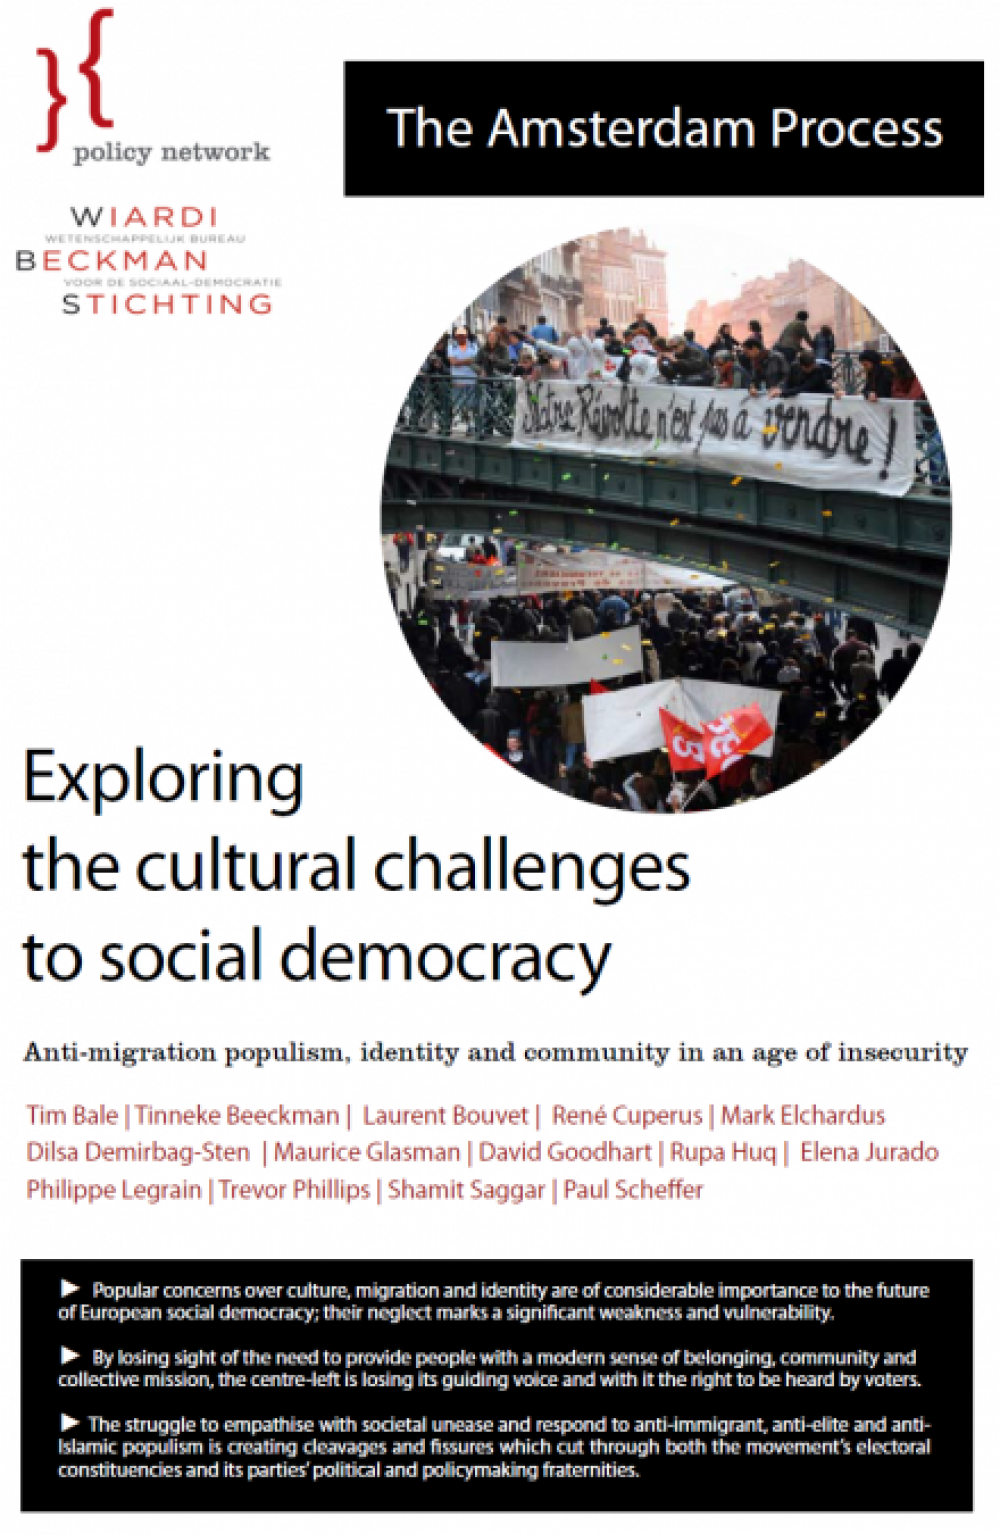 Exploring the cultural challenges to social democracy